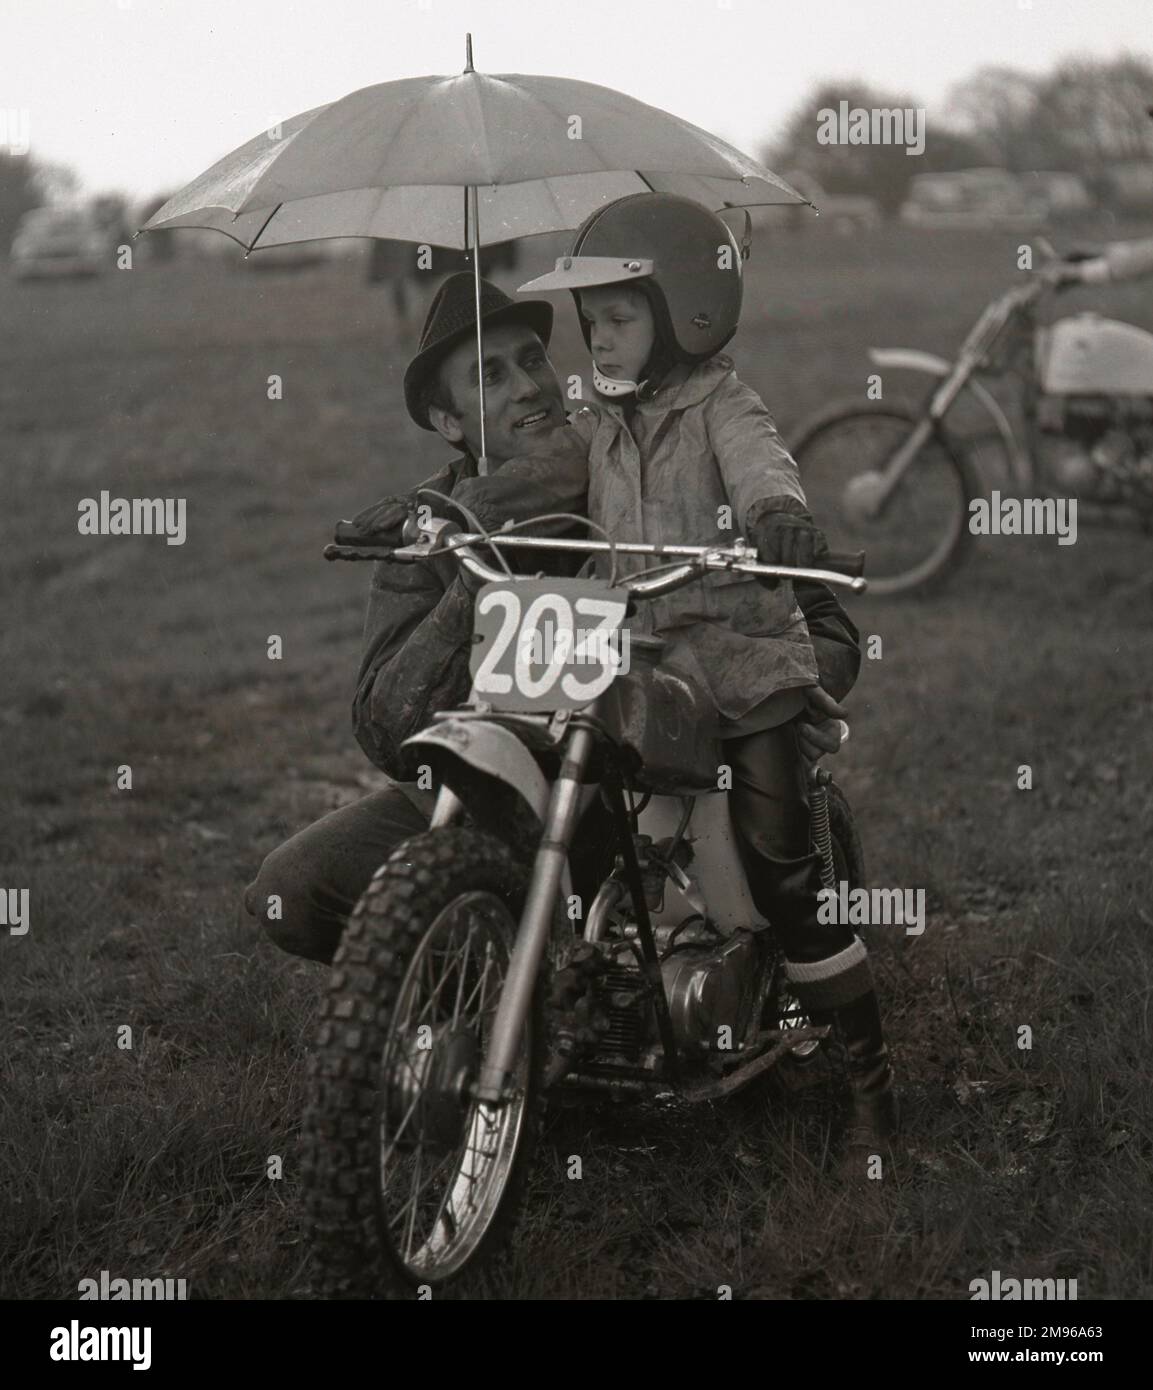 A man gives his son a bit of advice under an umbrella before the boy sets off on his junior sized motorcycle. Stock Photo